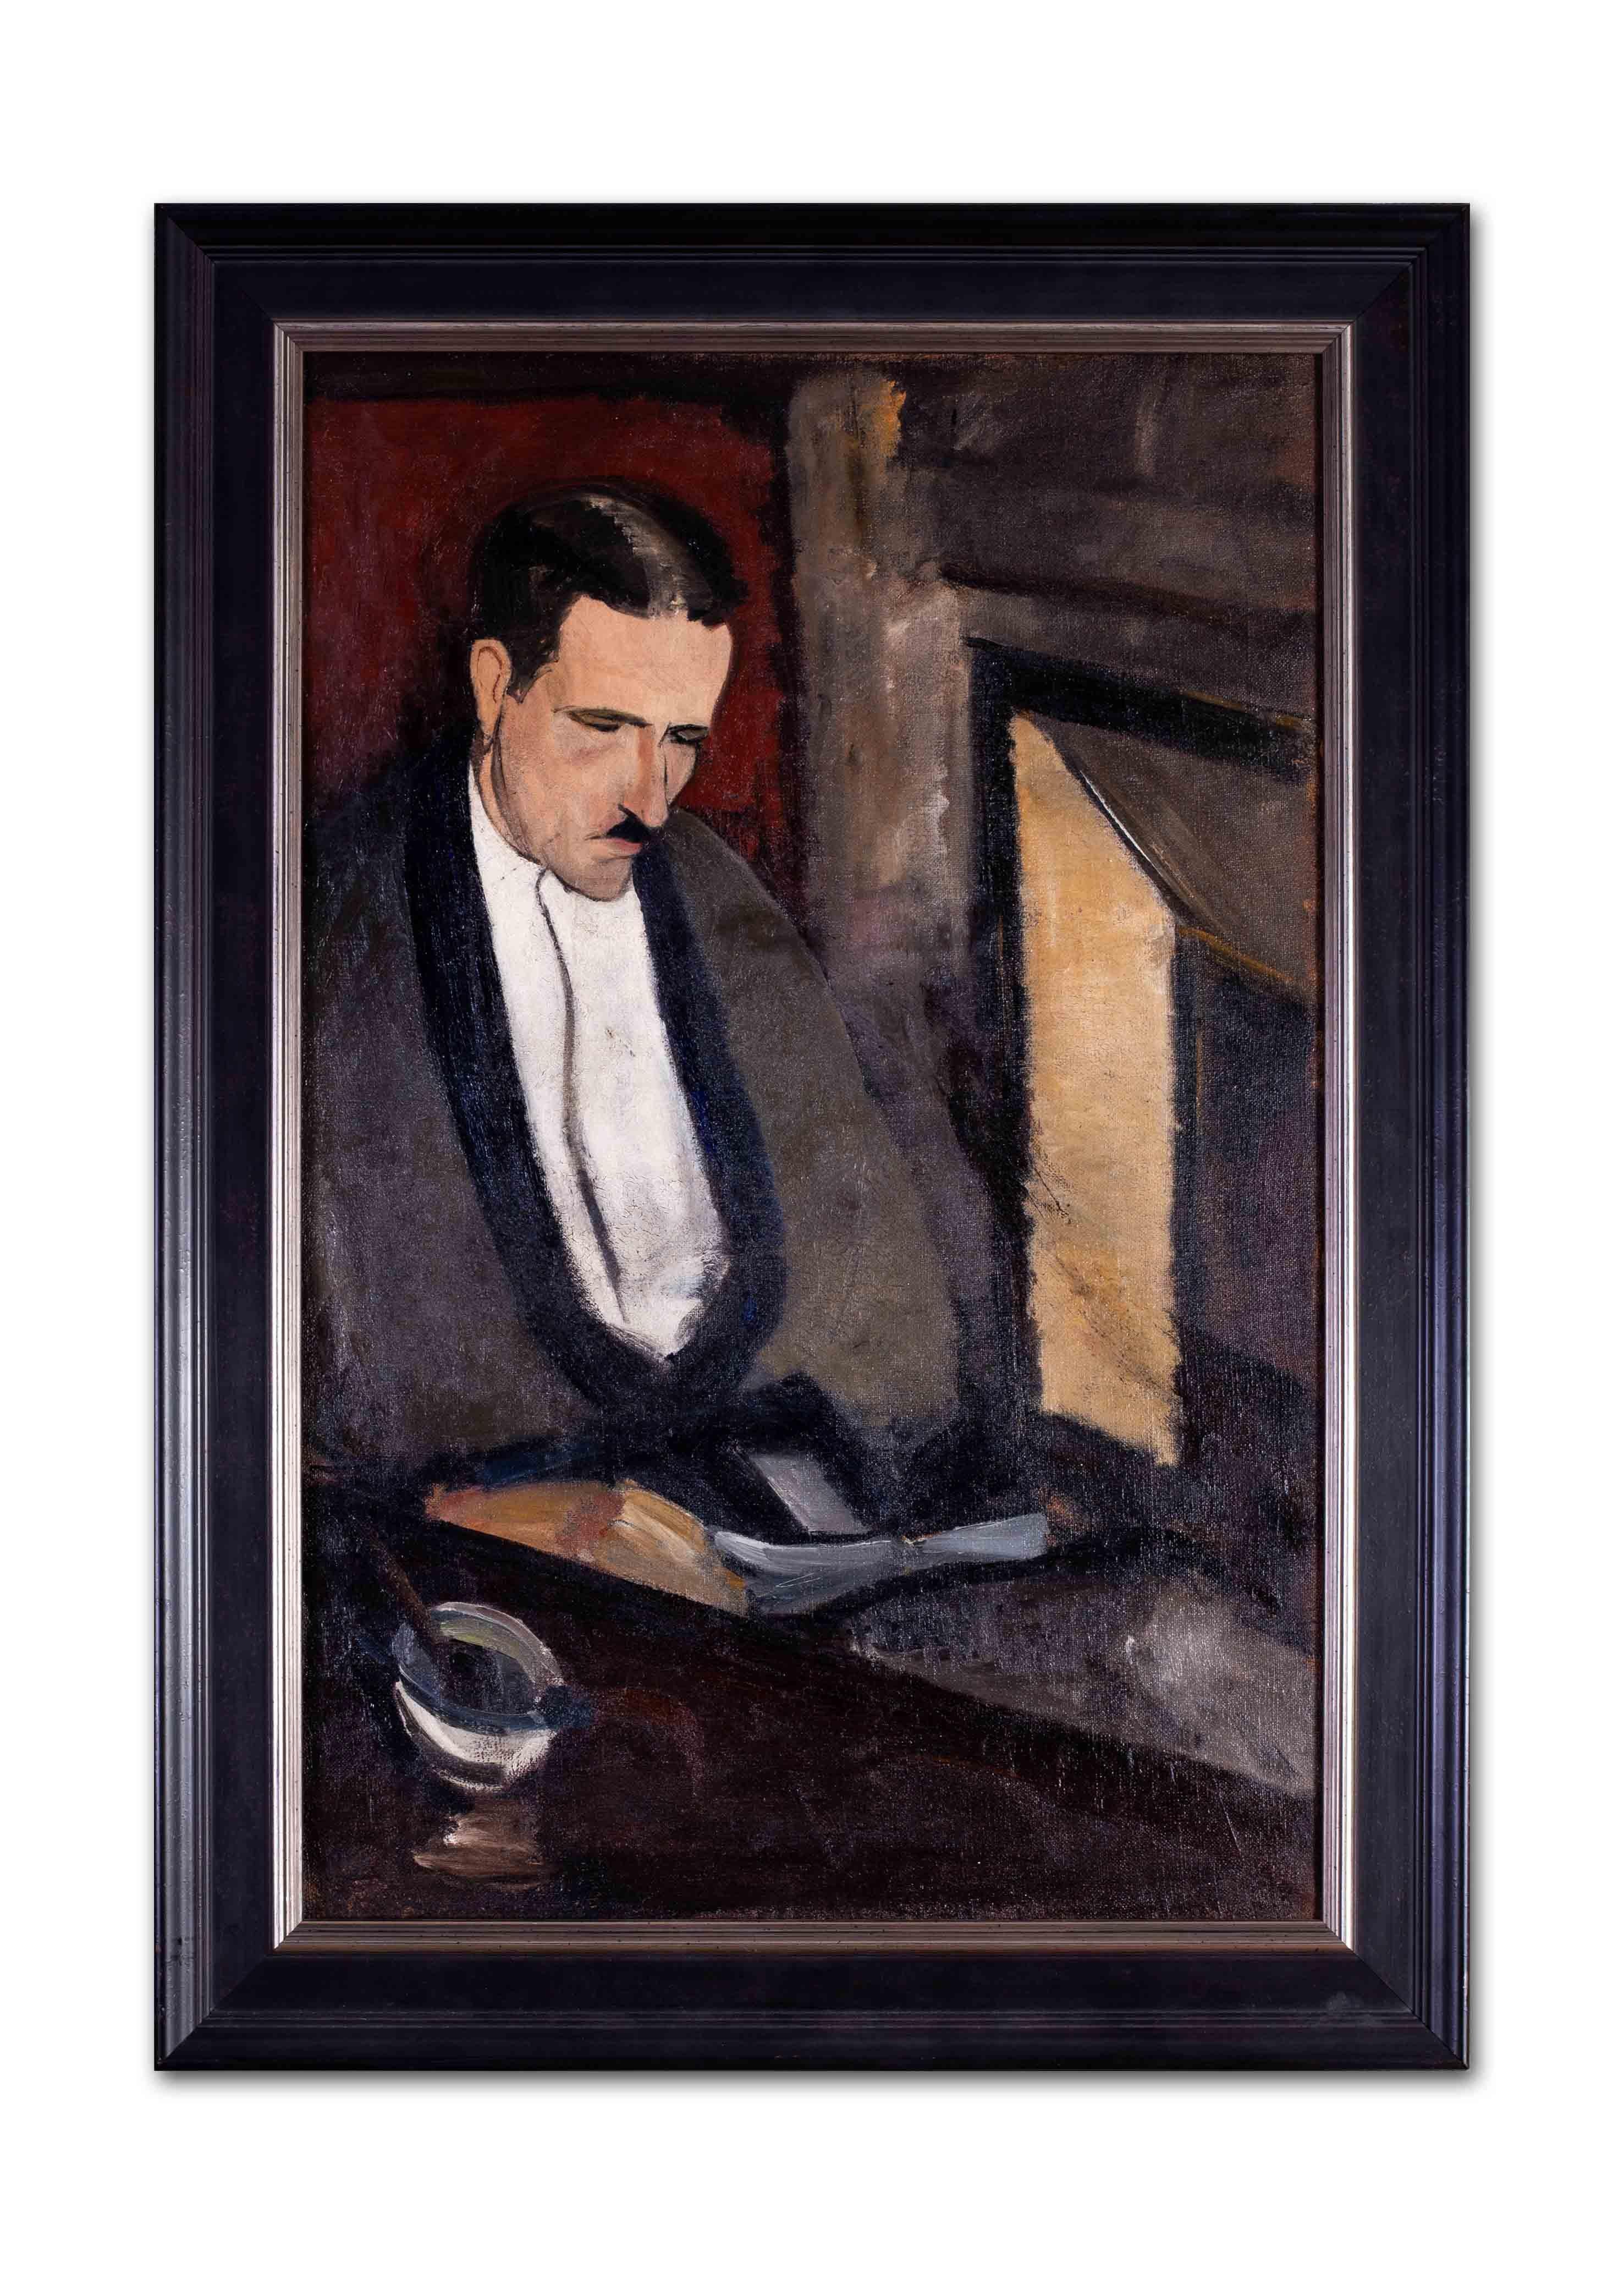 Etienne Morillon (French, 1884 – 1949)
Portrait of Miquel Utrillo
Oil on canvas
Atelier stamp of Etienne Morillon (on the stretcher)
39.1/2 x 25.3/4 in. (100.3 x 65.5 cm.)

Étienne Morillon, born in 1884, was a student of the Ecole des Beaux Arts of